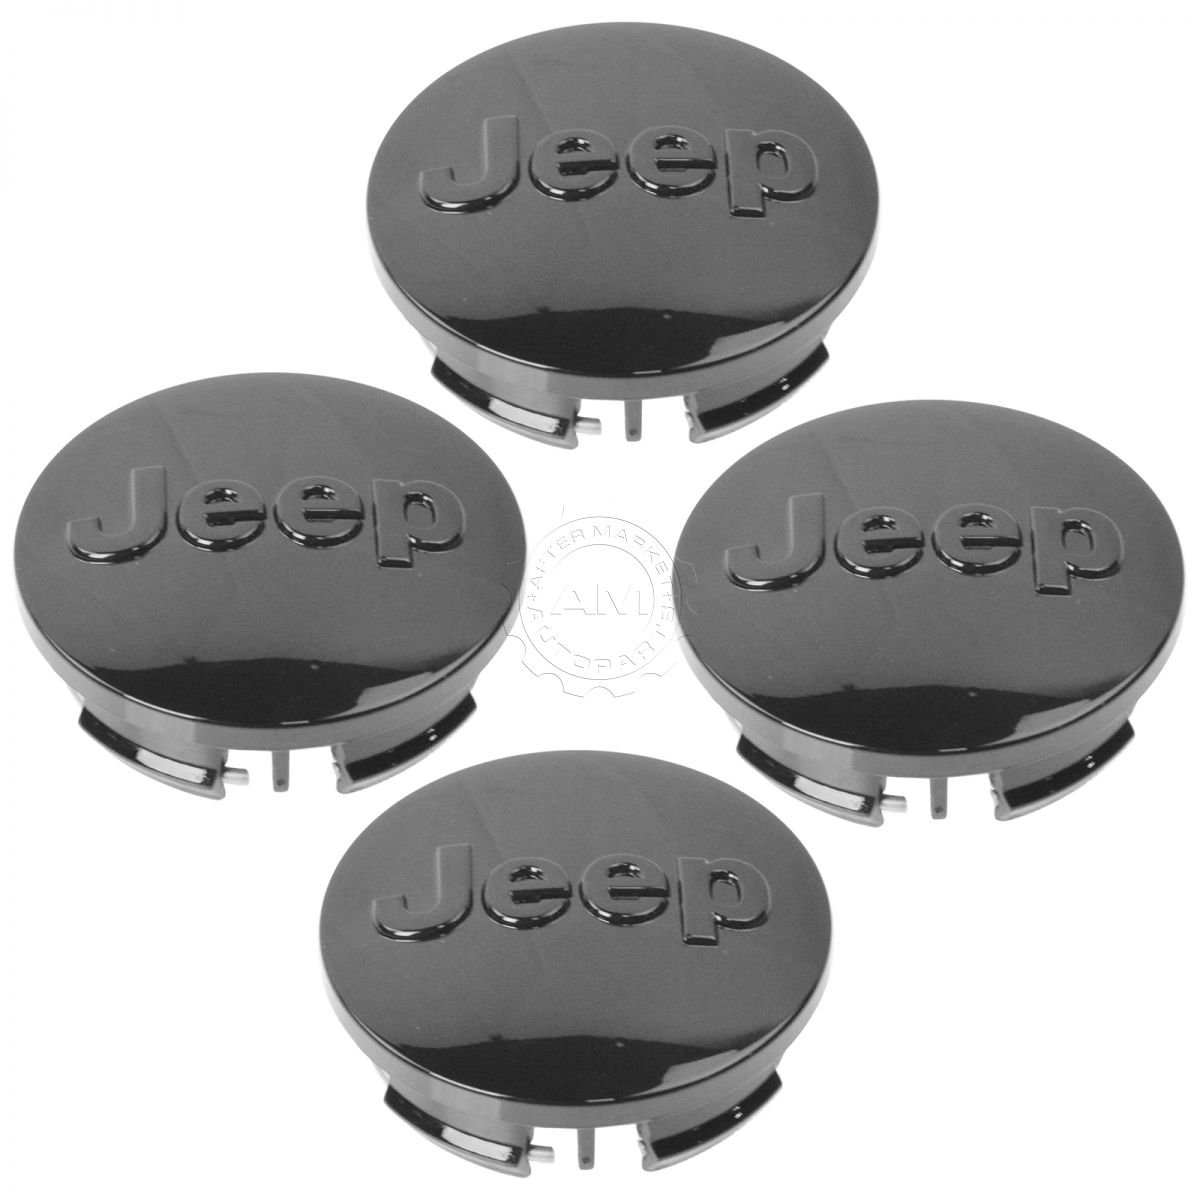 OEM Wheel Rim Center Cap Cover with Logo Set of 4 for Jeep ...